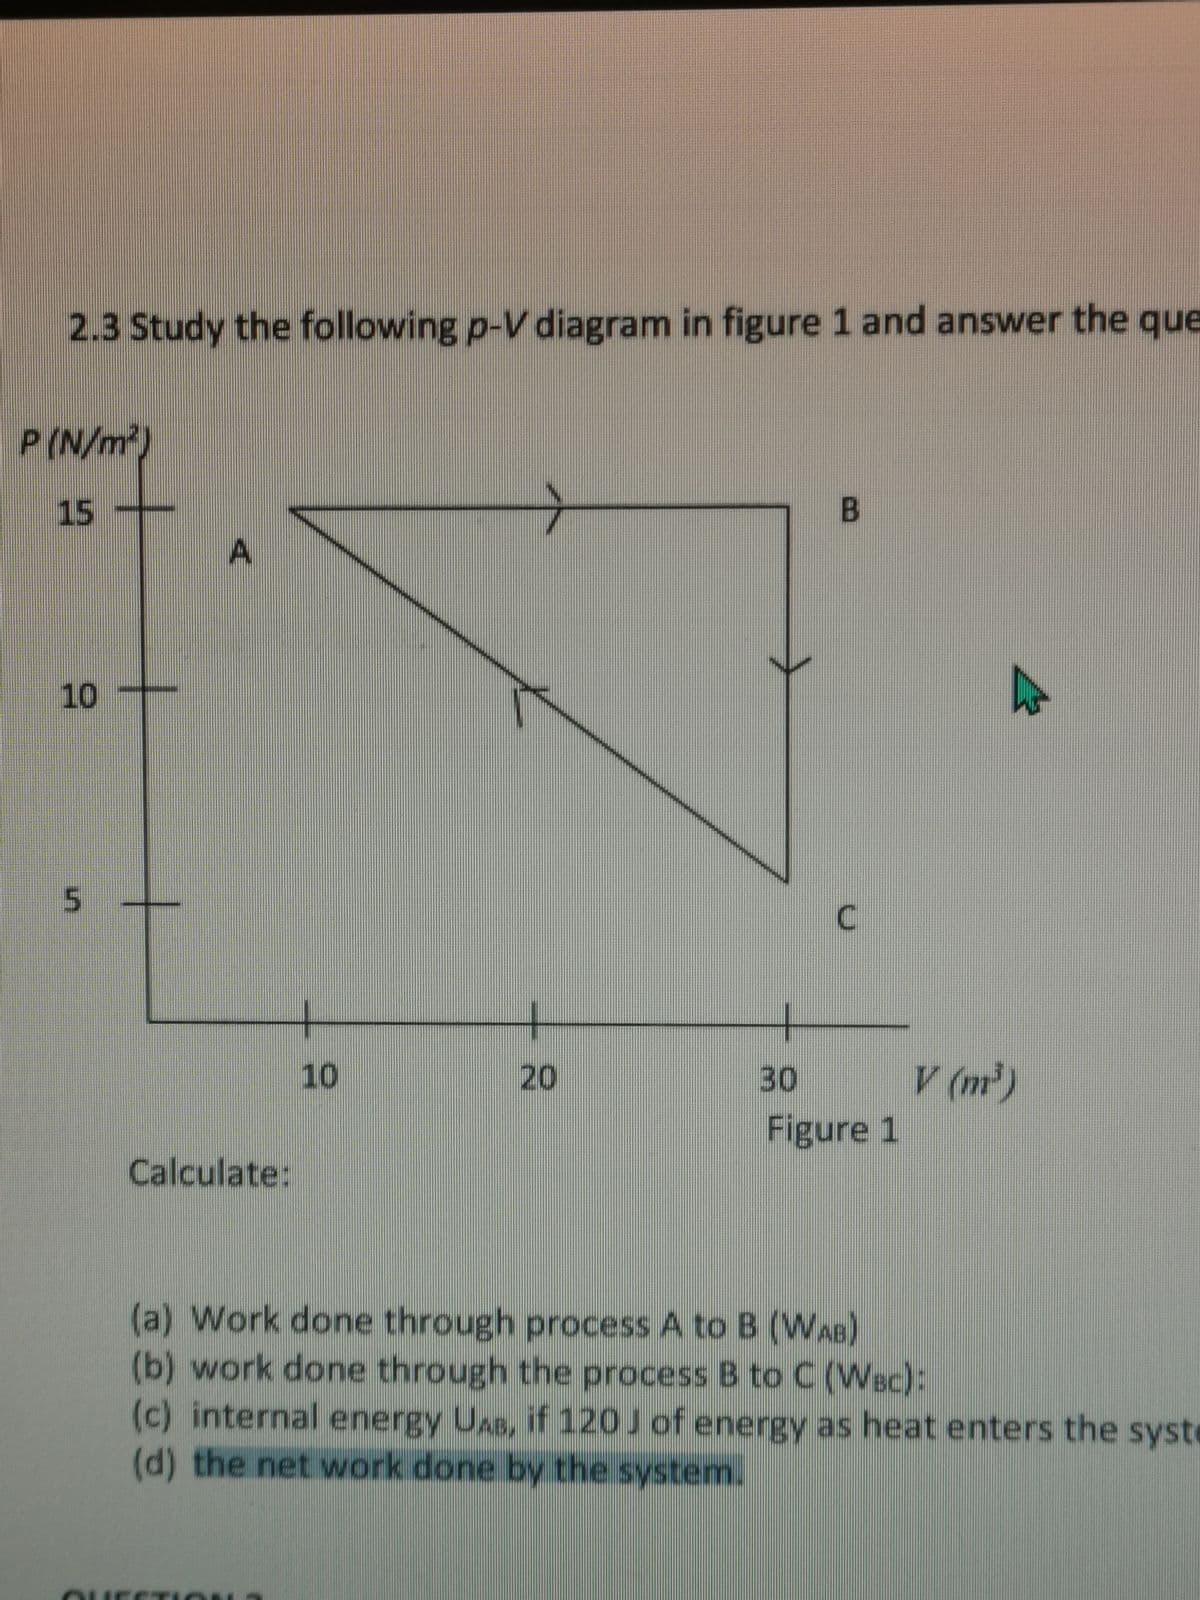 2.3 Study the following p-V diagram in figure 1 and answer the que
P (N/m)
15
-
B
A.
10
C.
V (m)
Figure 1
10
20
30
Calculate:
(a) Work done through process A to B (WAB)
(b) work done through the process B to C (Wsc):
(c) internal energy UAB, if 120J of energy as heat enters the syst
(d) the net work done by the system.
